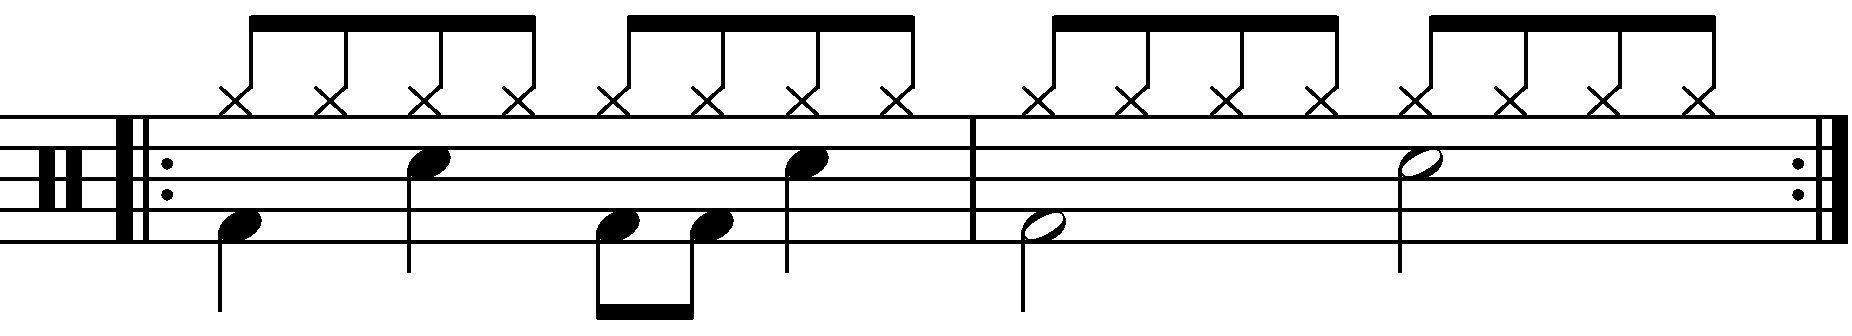 An example of changing to a half time groove